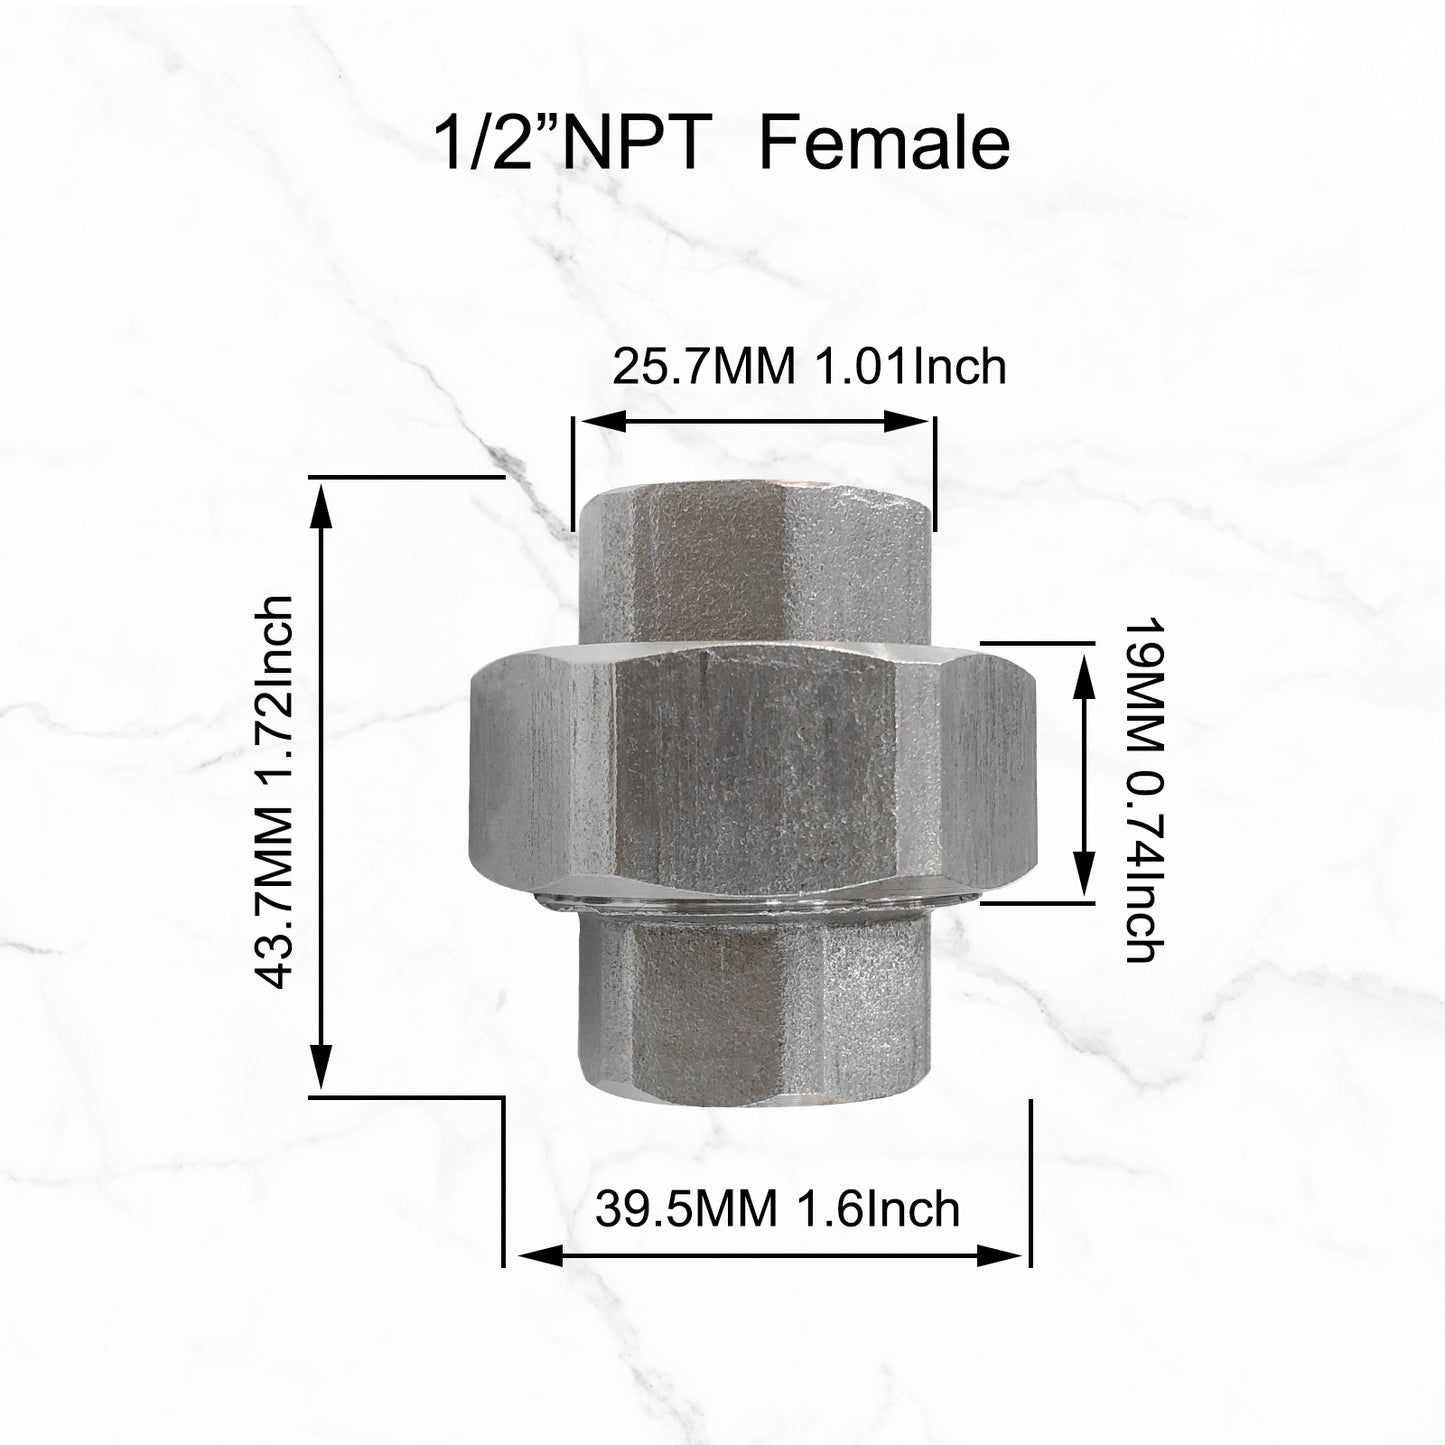 AN FITTINGS -6 FEMALE AN FITTING UNION COUPLER